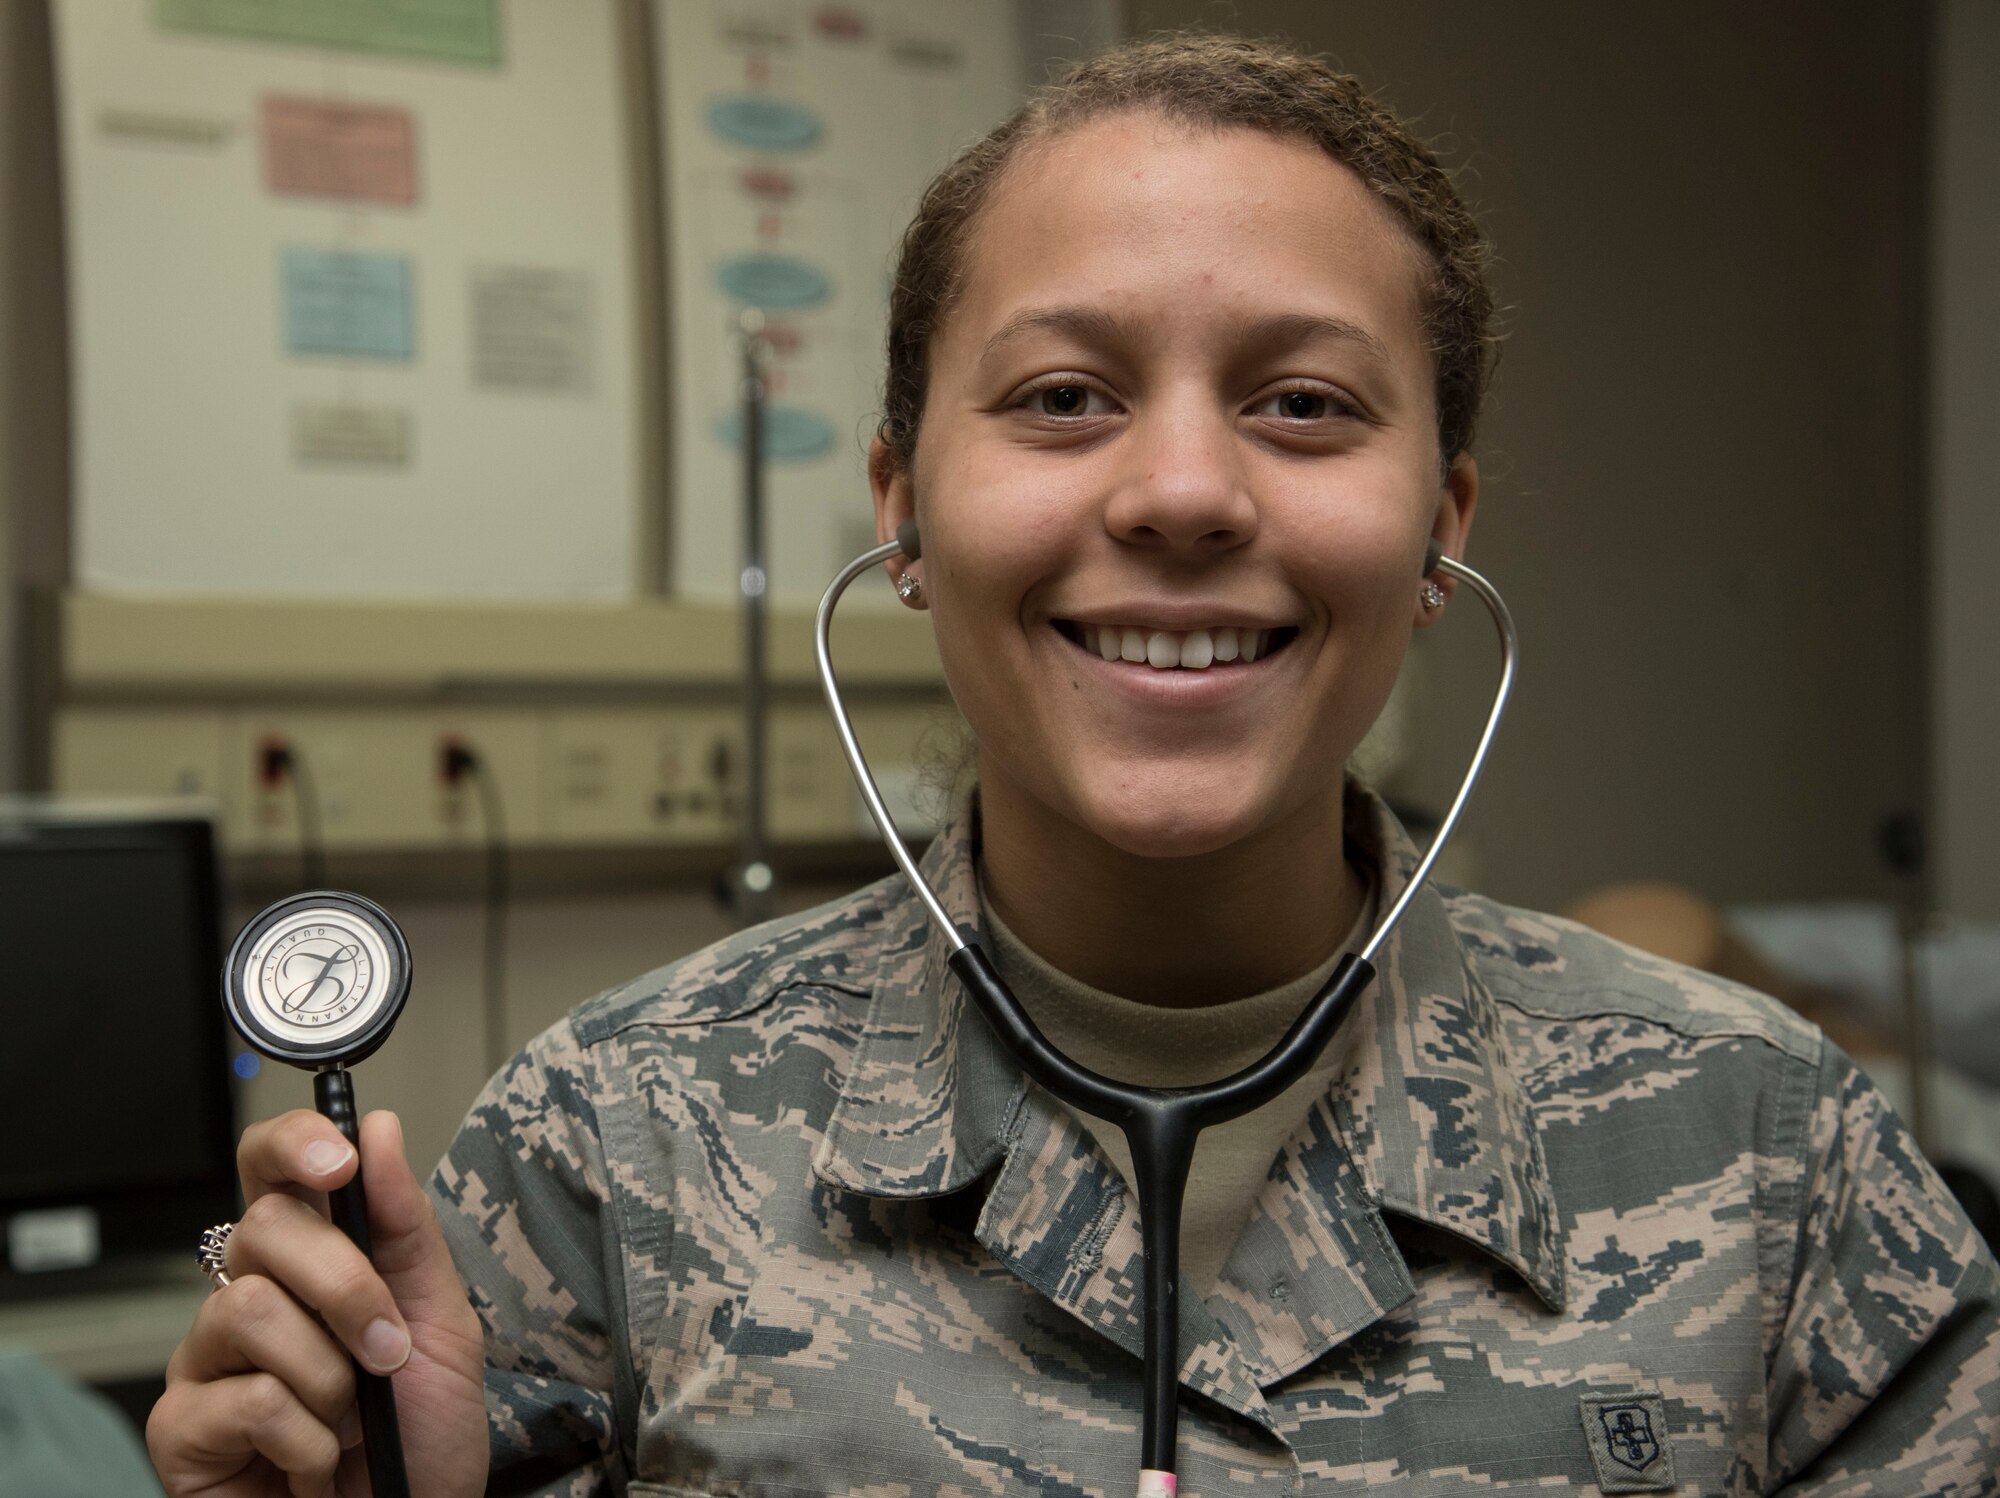 U.S. Air Force Airman 1st Class Dominique Case, a 35th Medical Operations Squadron aerospace medical technician, holds a stethoscope at Misawa Air Base, Japan, Feb. 3, 2017. One Friday a month, the 35th Medical Group closes down and holds a training to hone their life-saving skills. (U.S. Air Force photo by Airman 1st Class Sadie Colbert)